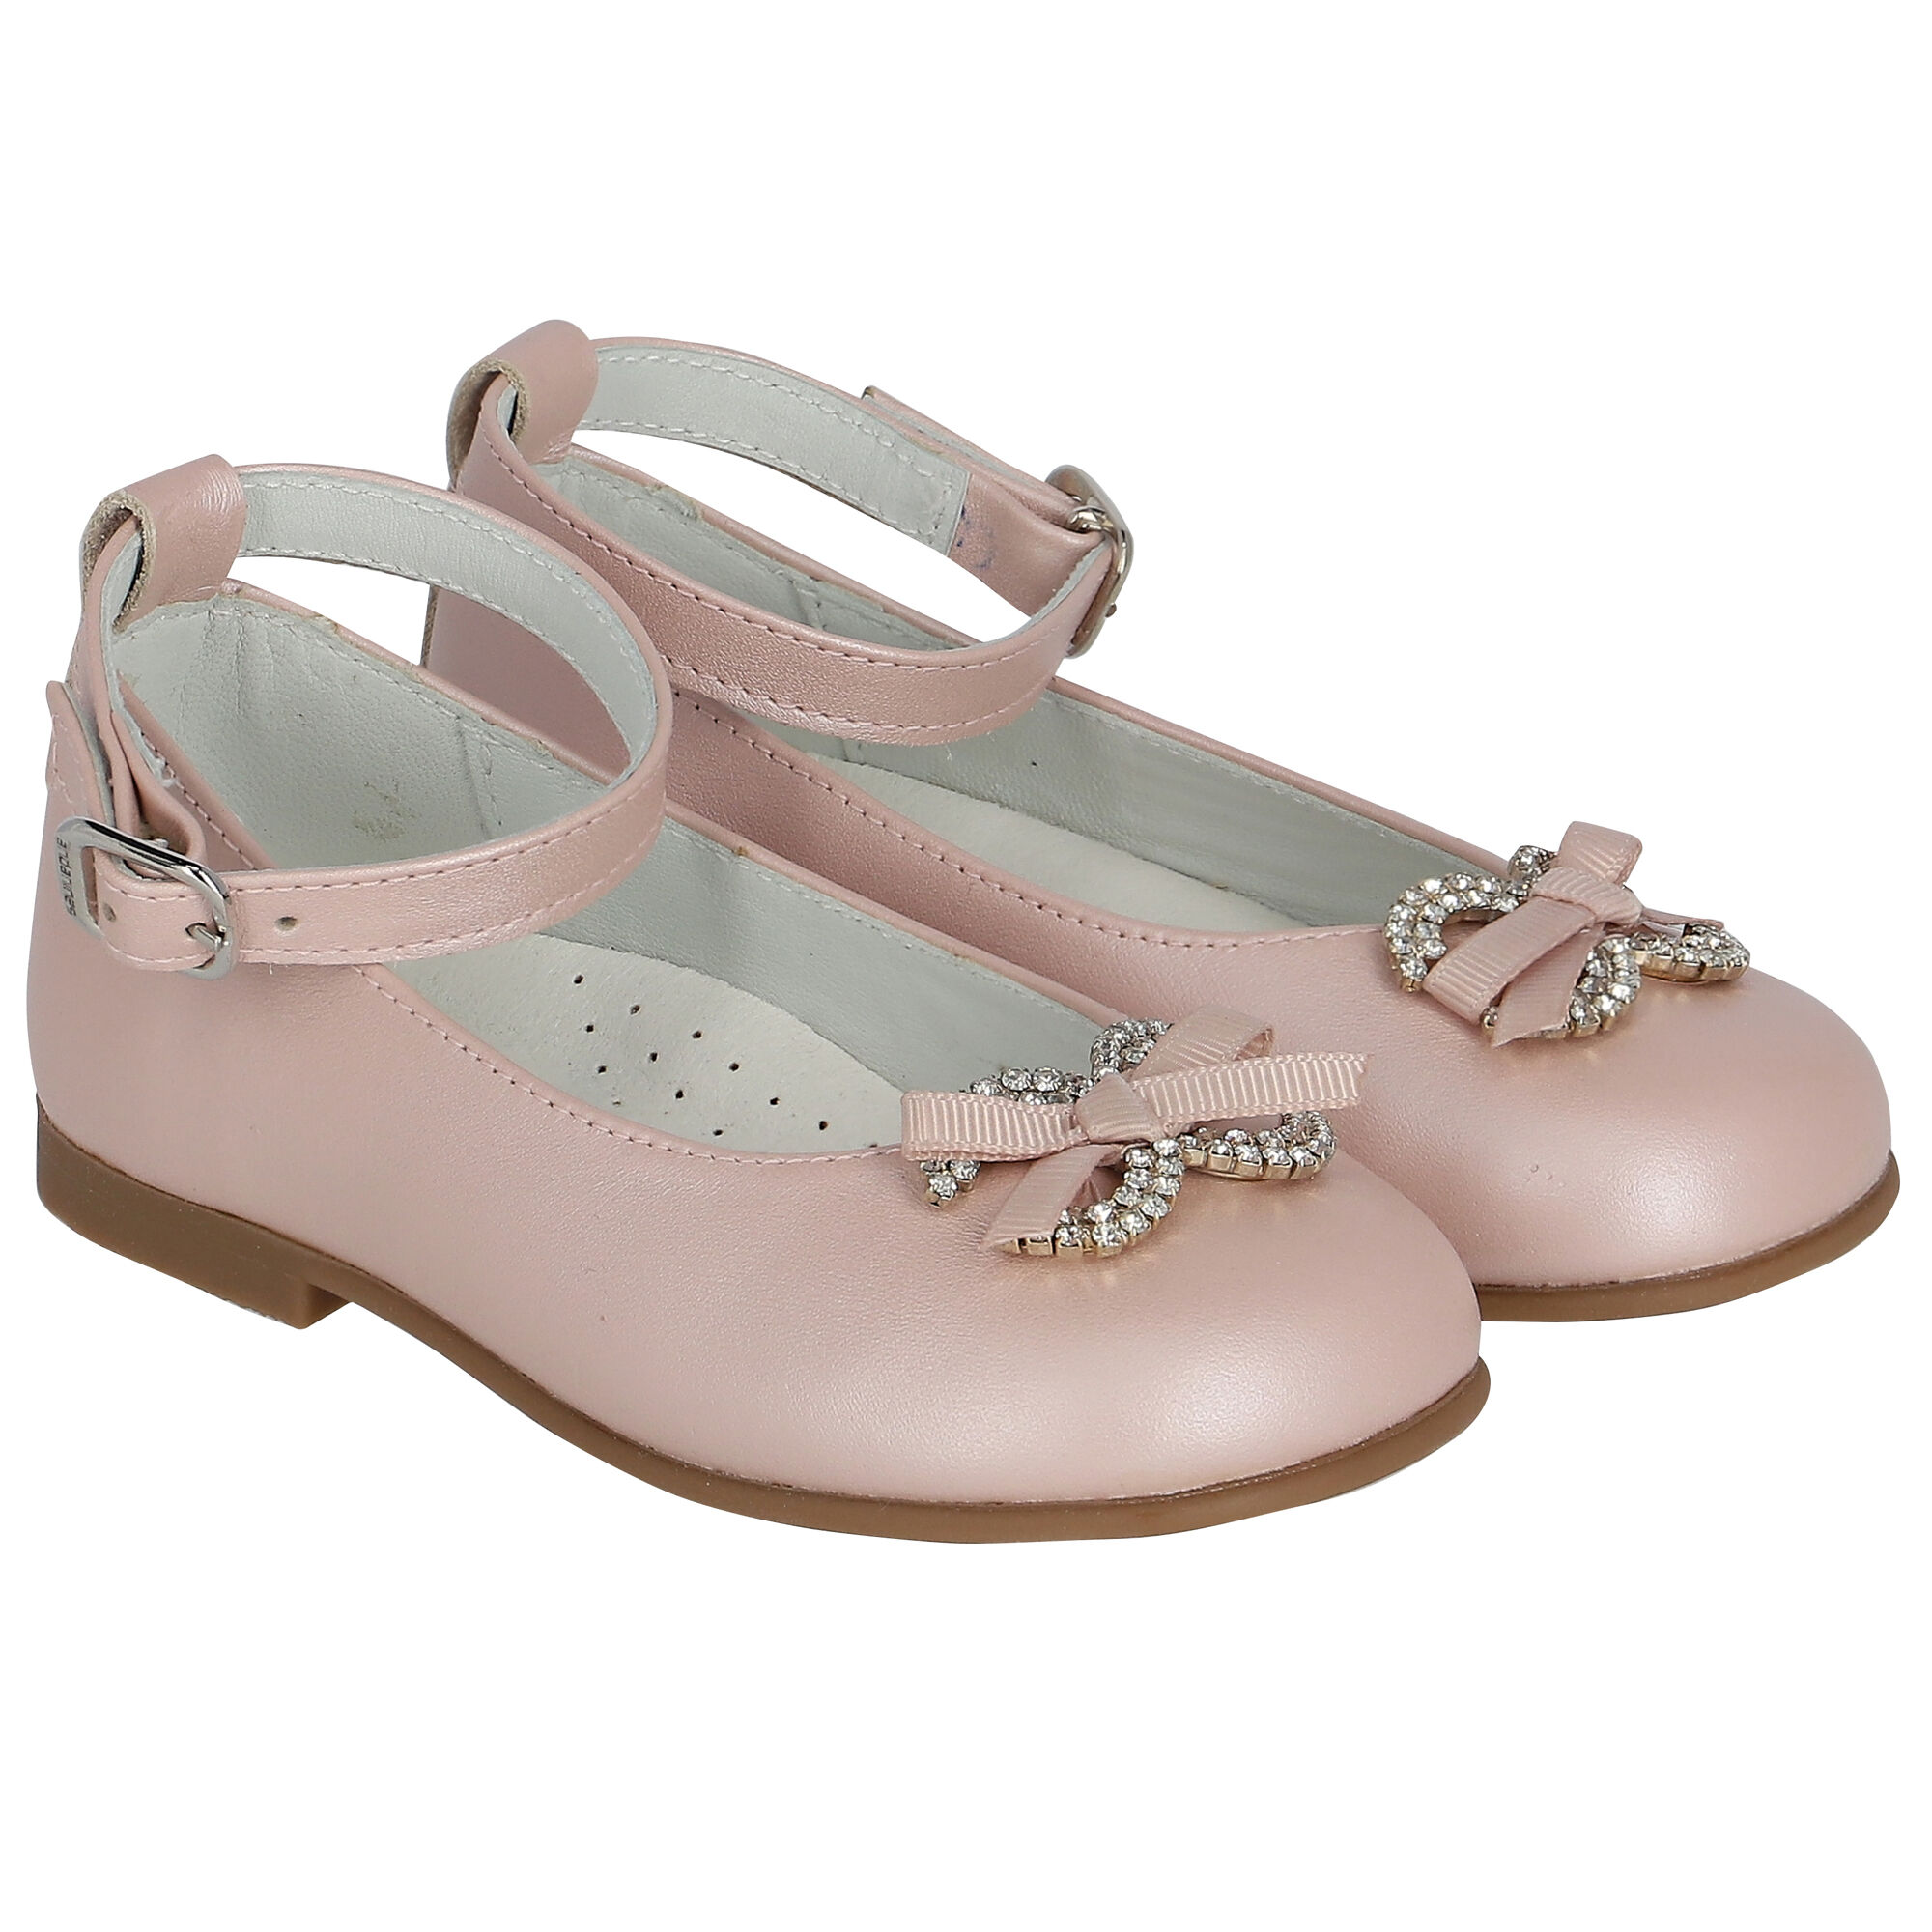 ANDANINES buckled leather ballerina shoes - Pink